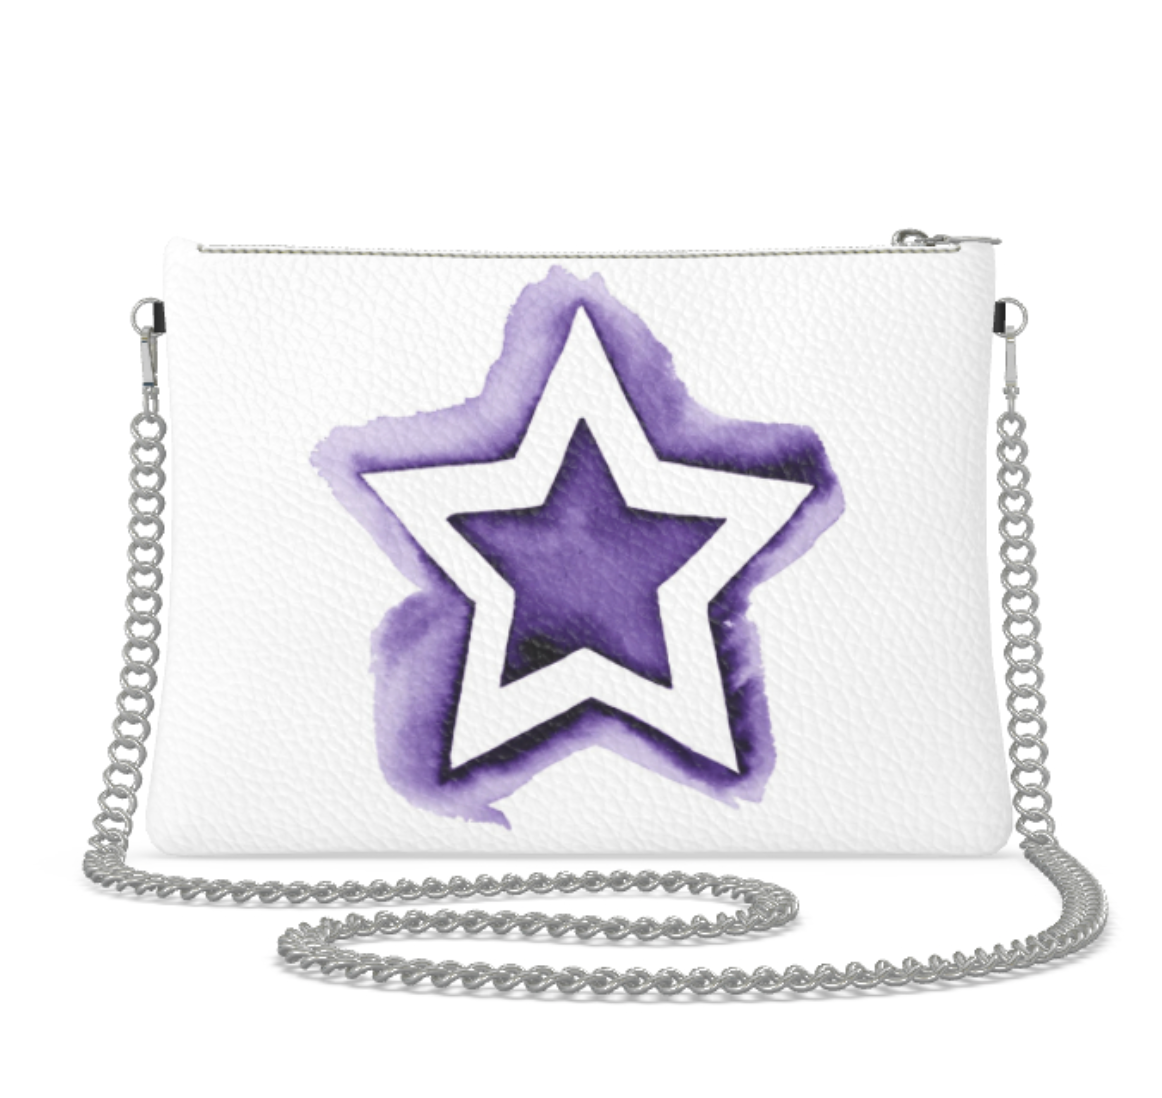 UNTITLED BOUTIQUE Purple and White Leather Star Crossbody Bag with Silver Chain - Limited Edition